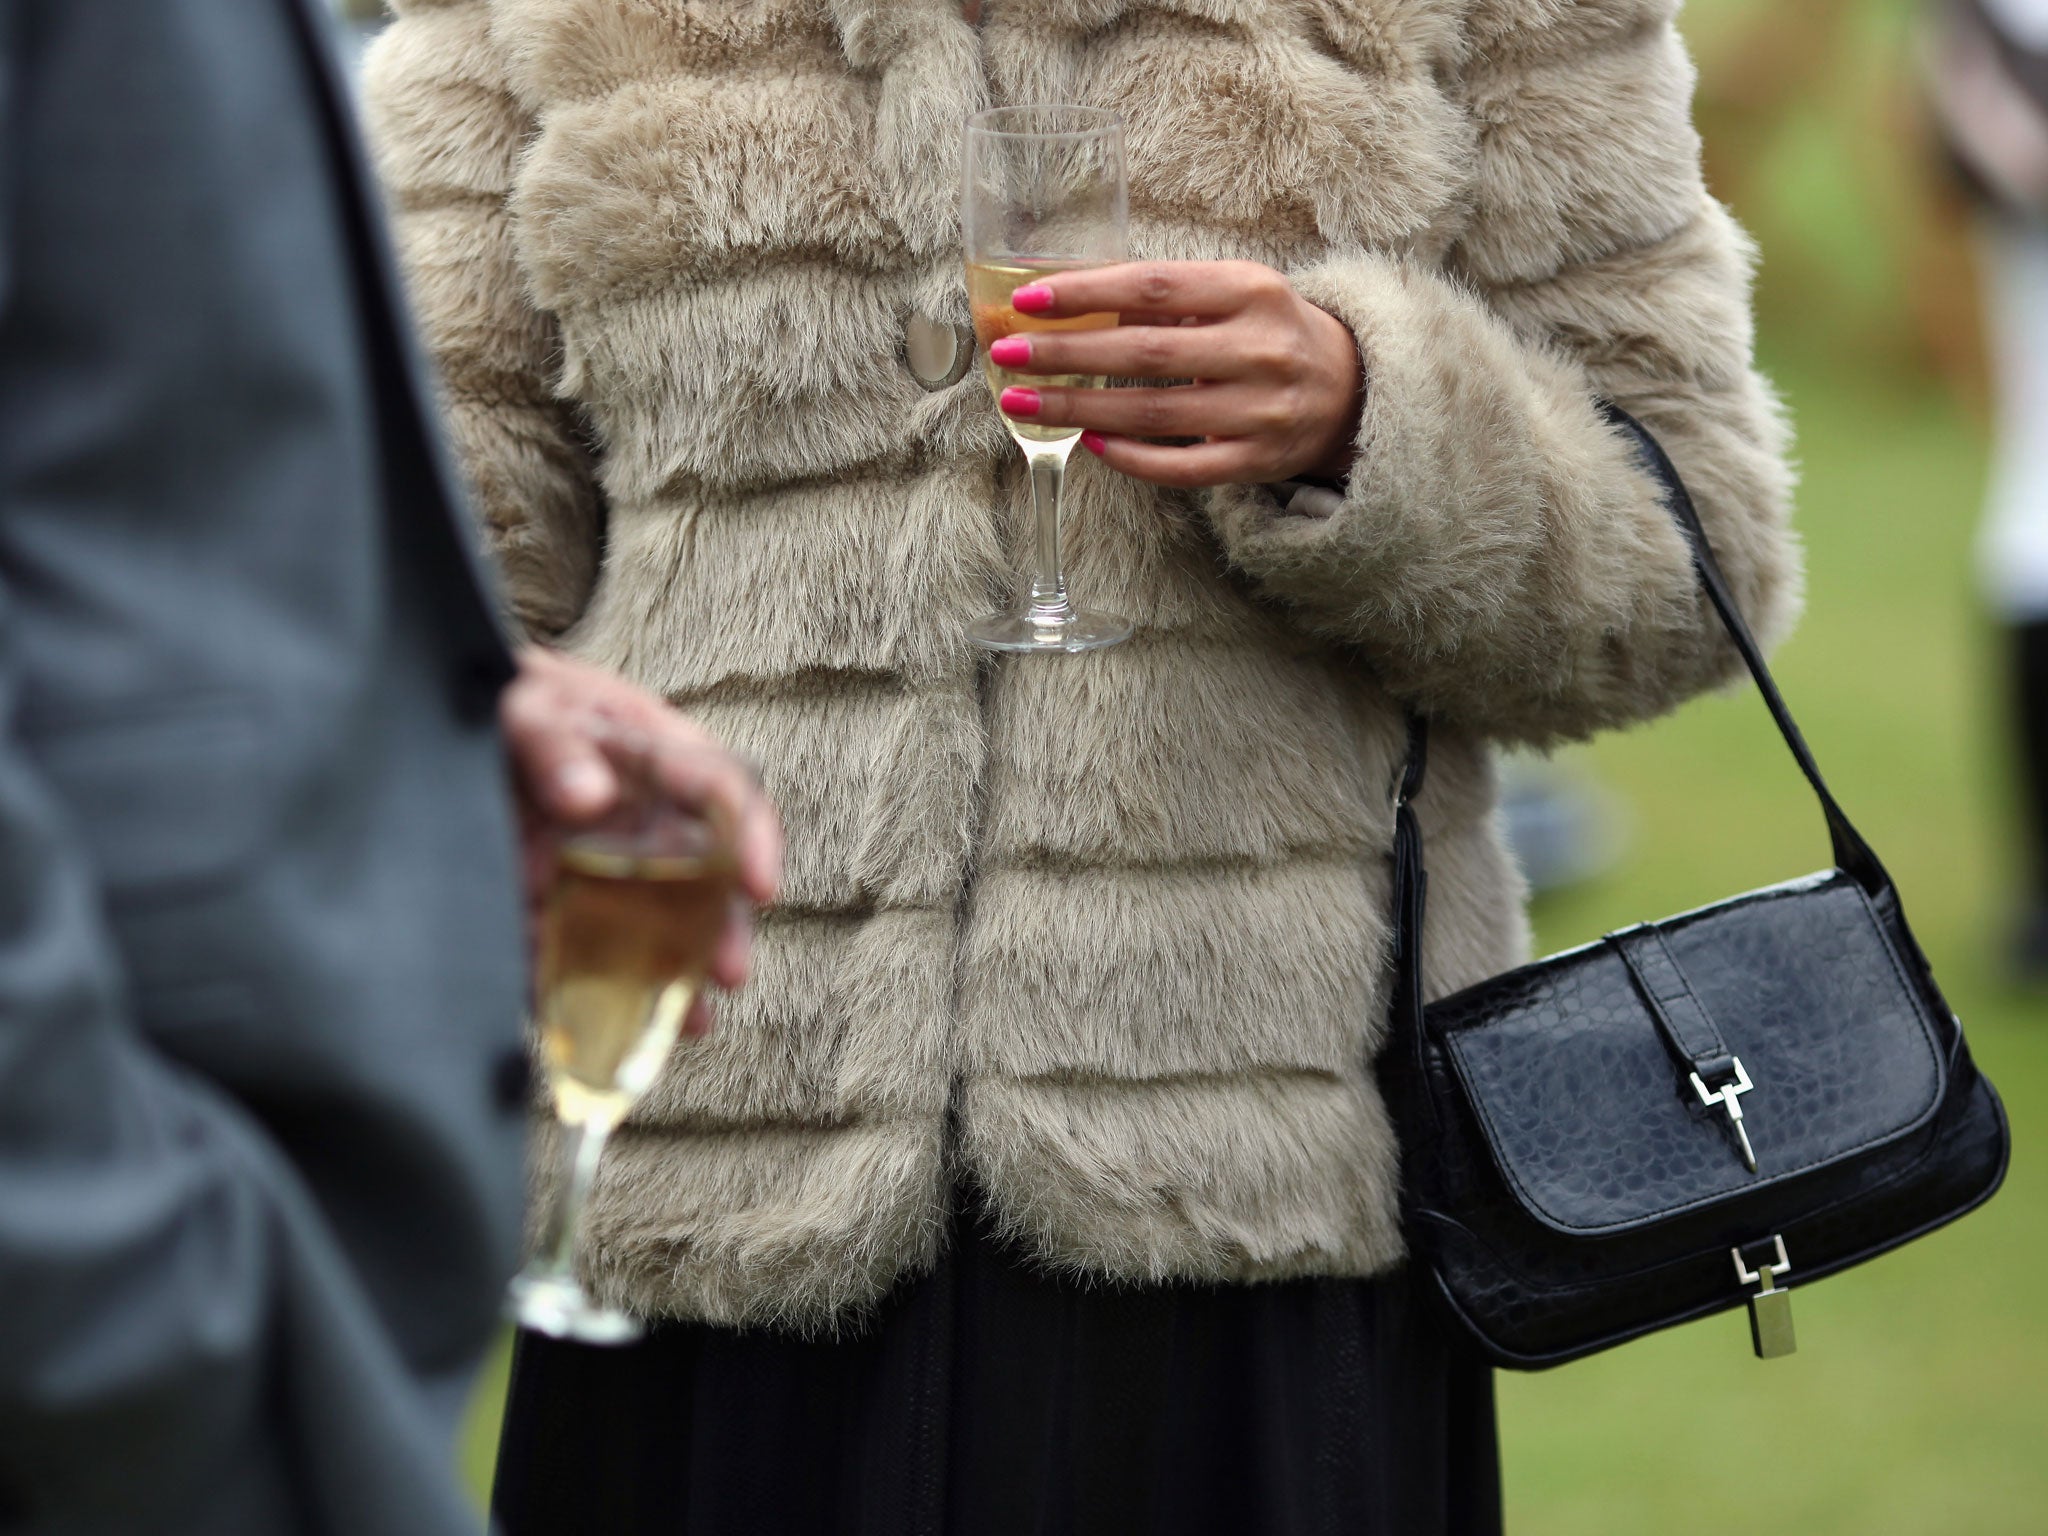 A couple drink champagne at the 'Salon Prive' luxury and supercar event on June 22, 2011 in London, England.